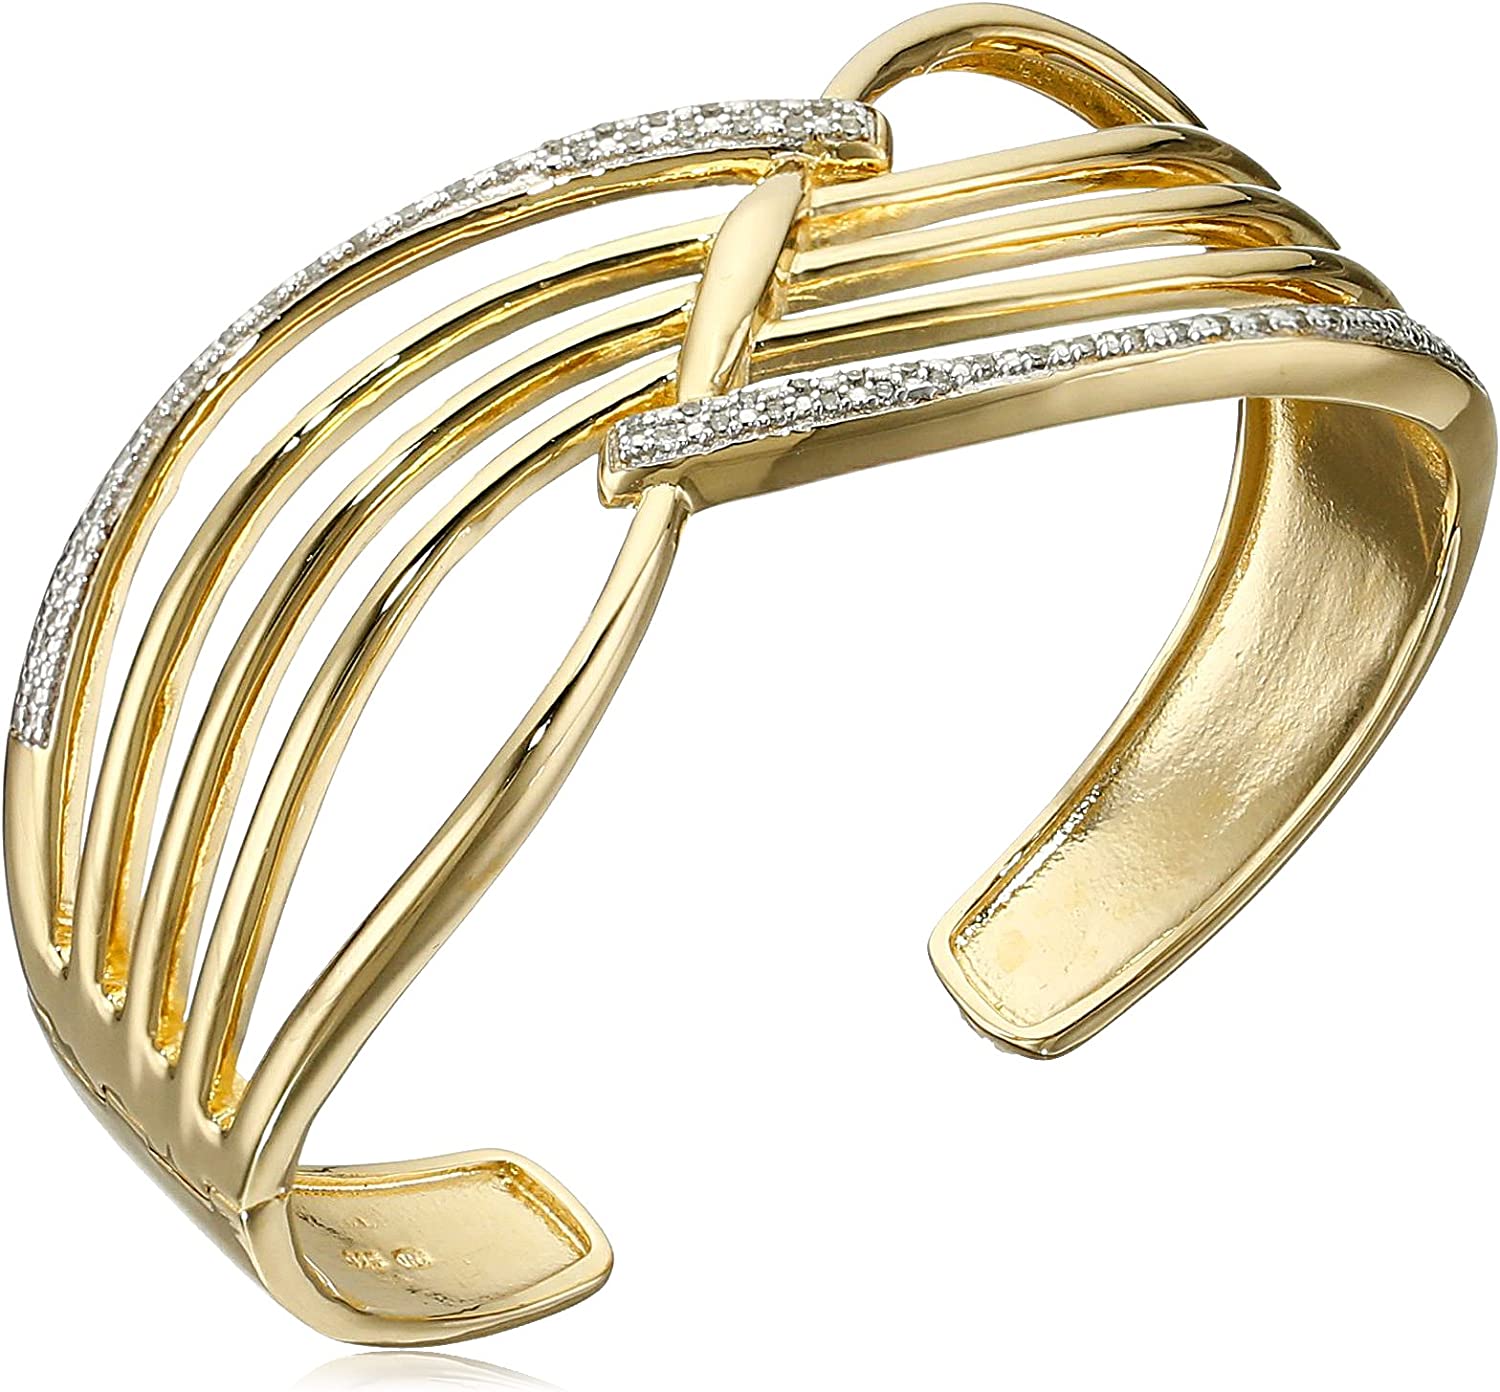 18k Yellow Gold Plated Sterling Silver Genuine Diamond Hinged Cuff Bracelet (1/4 cttw, I-J Color, I2-I3 Clarity), 7.25"